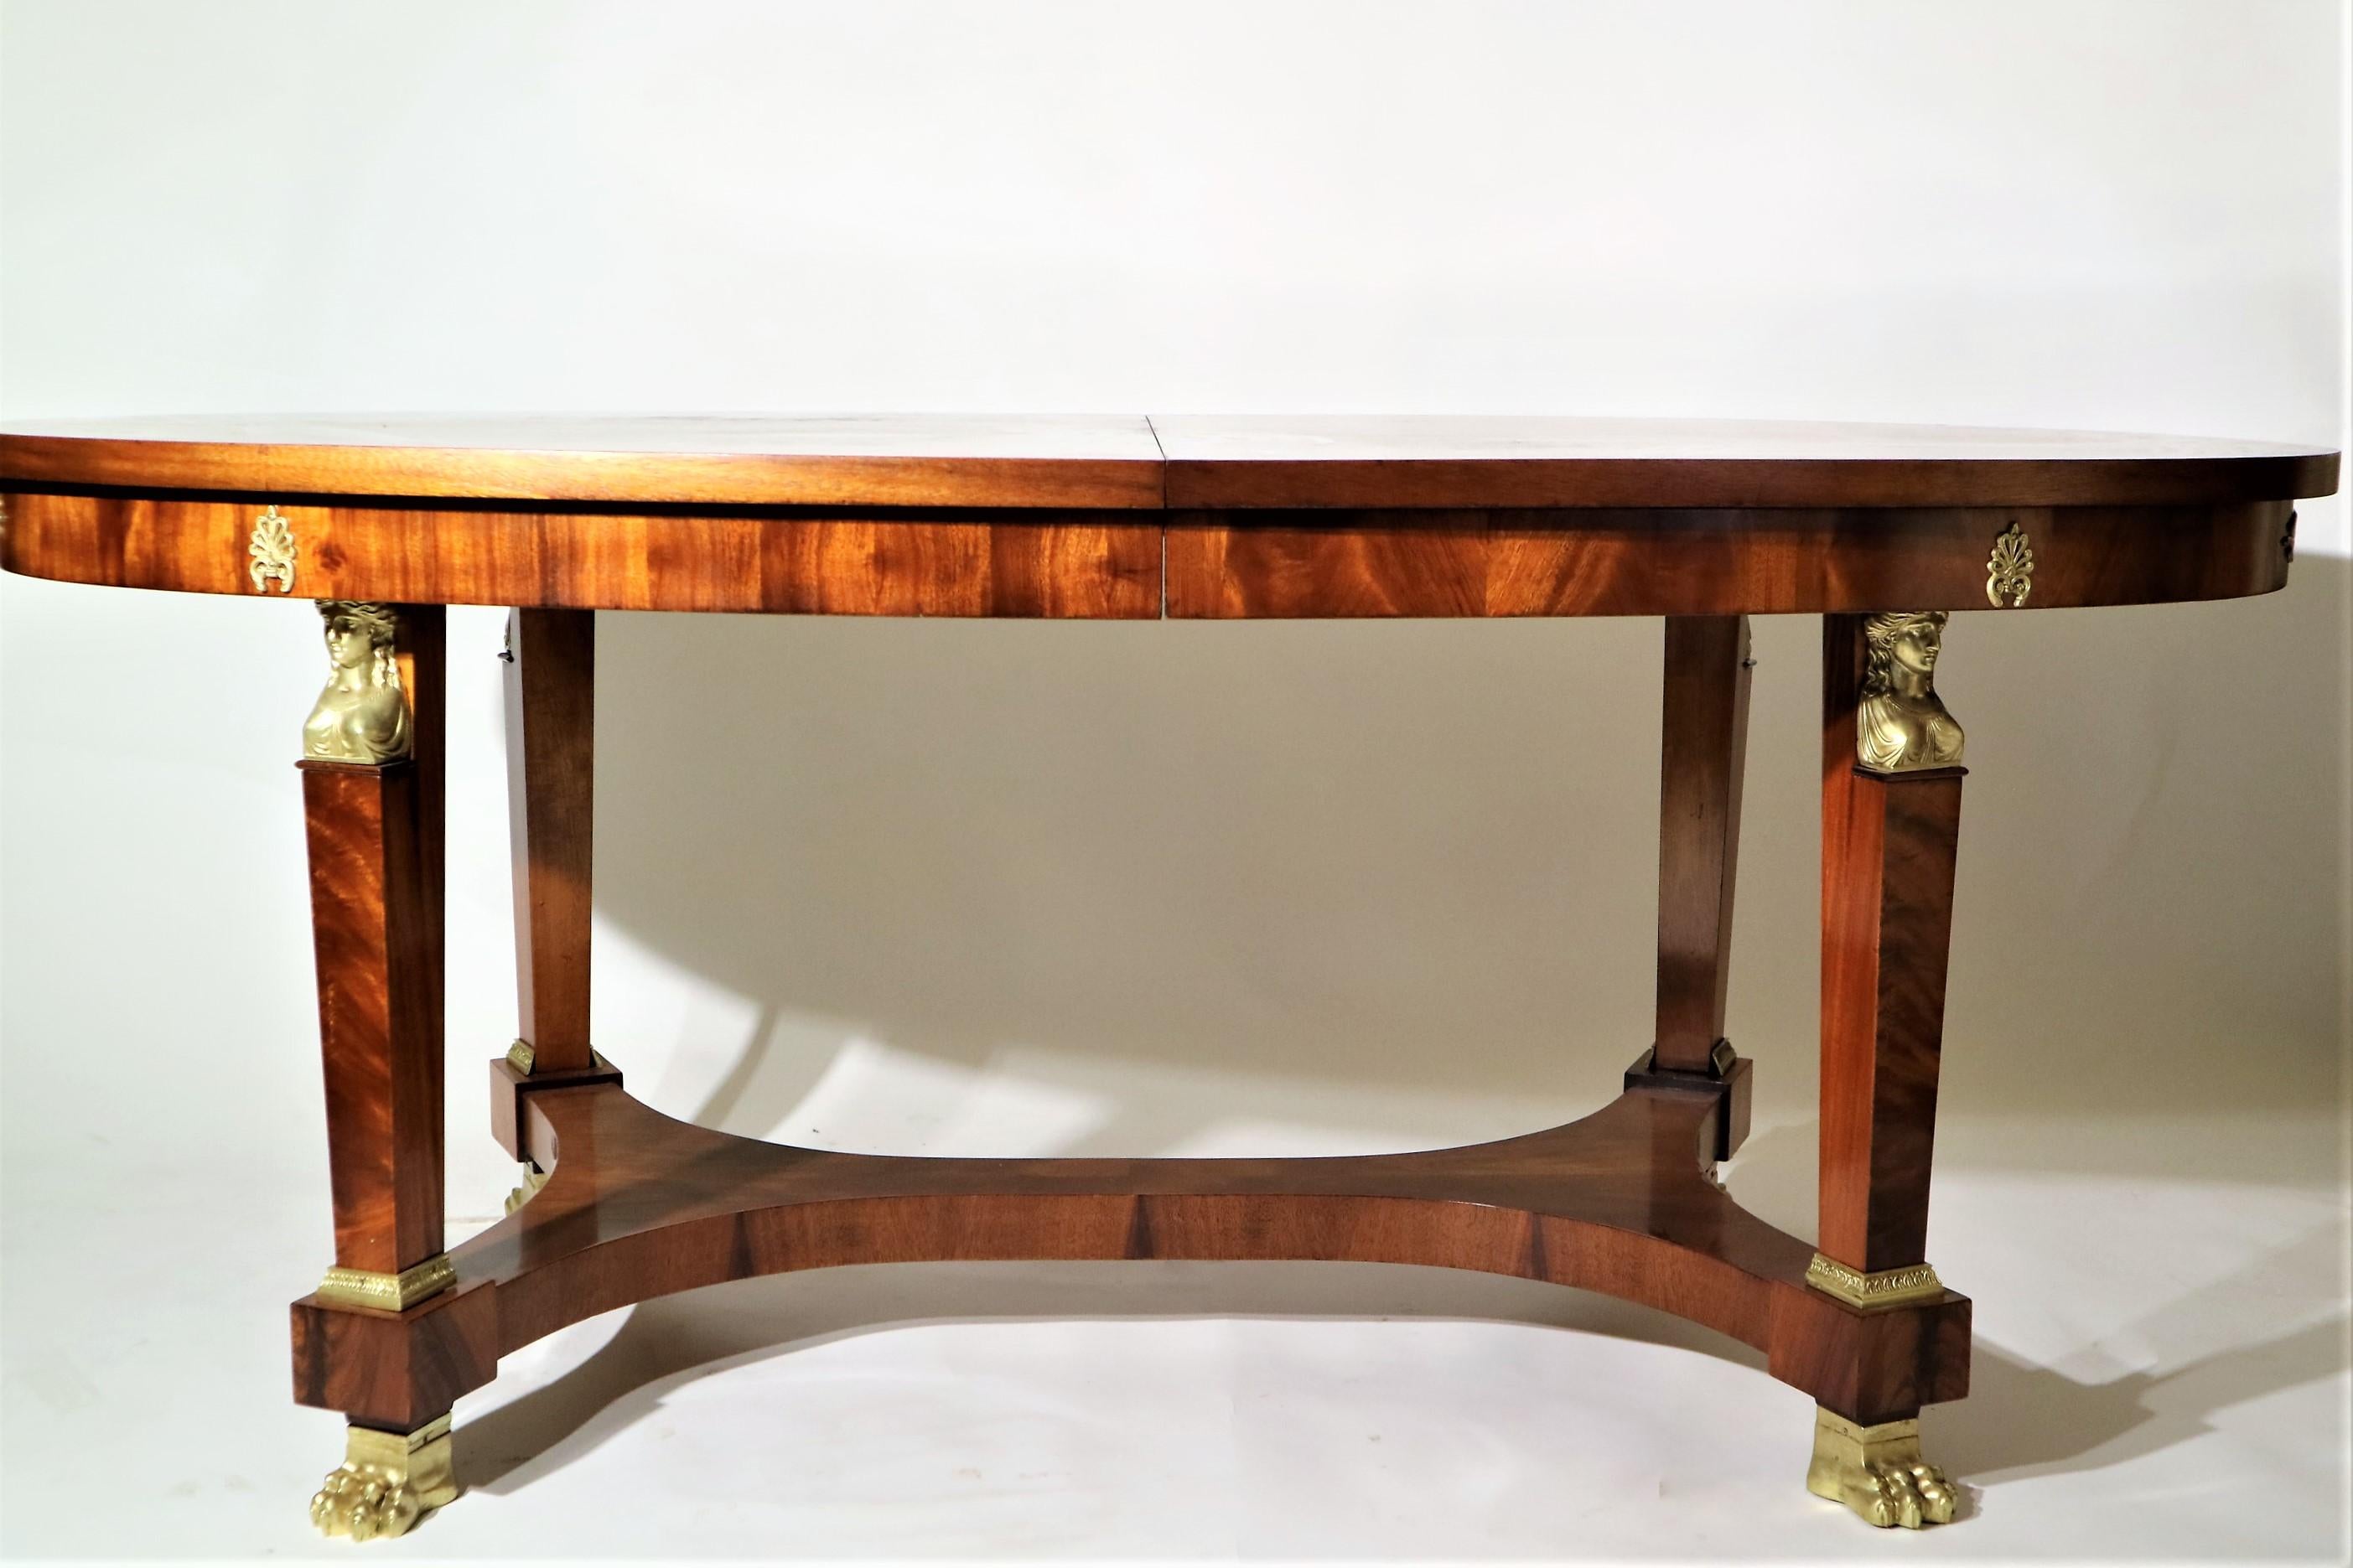 Empire style extensible dining table with beautiful oval shape in flamed mahogany, 20th century. Egyptian style bronze decorations on ferini feet. It is a very stabile table that leans on four legs with a cruise.

Table measures: cm. 180 x 110 x